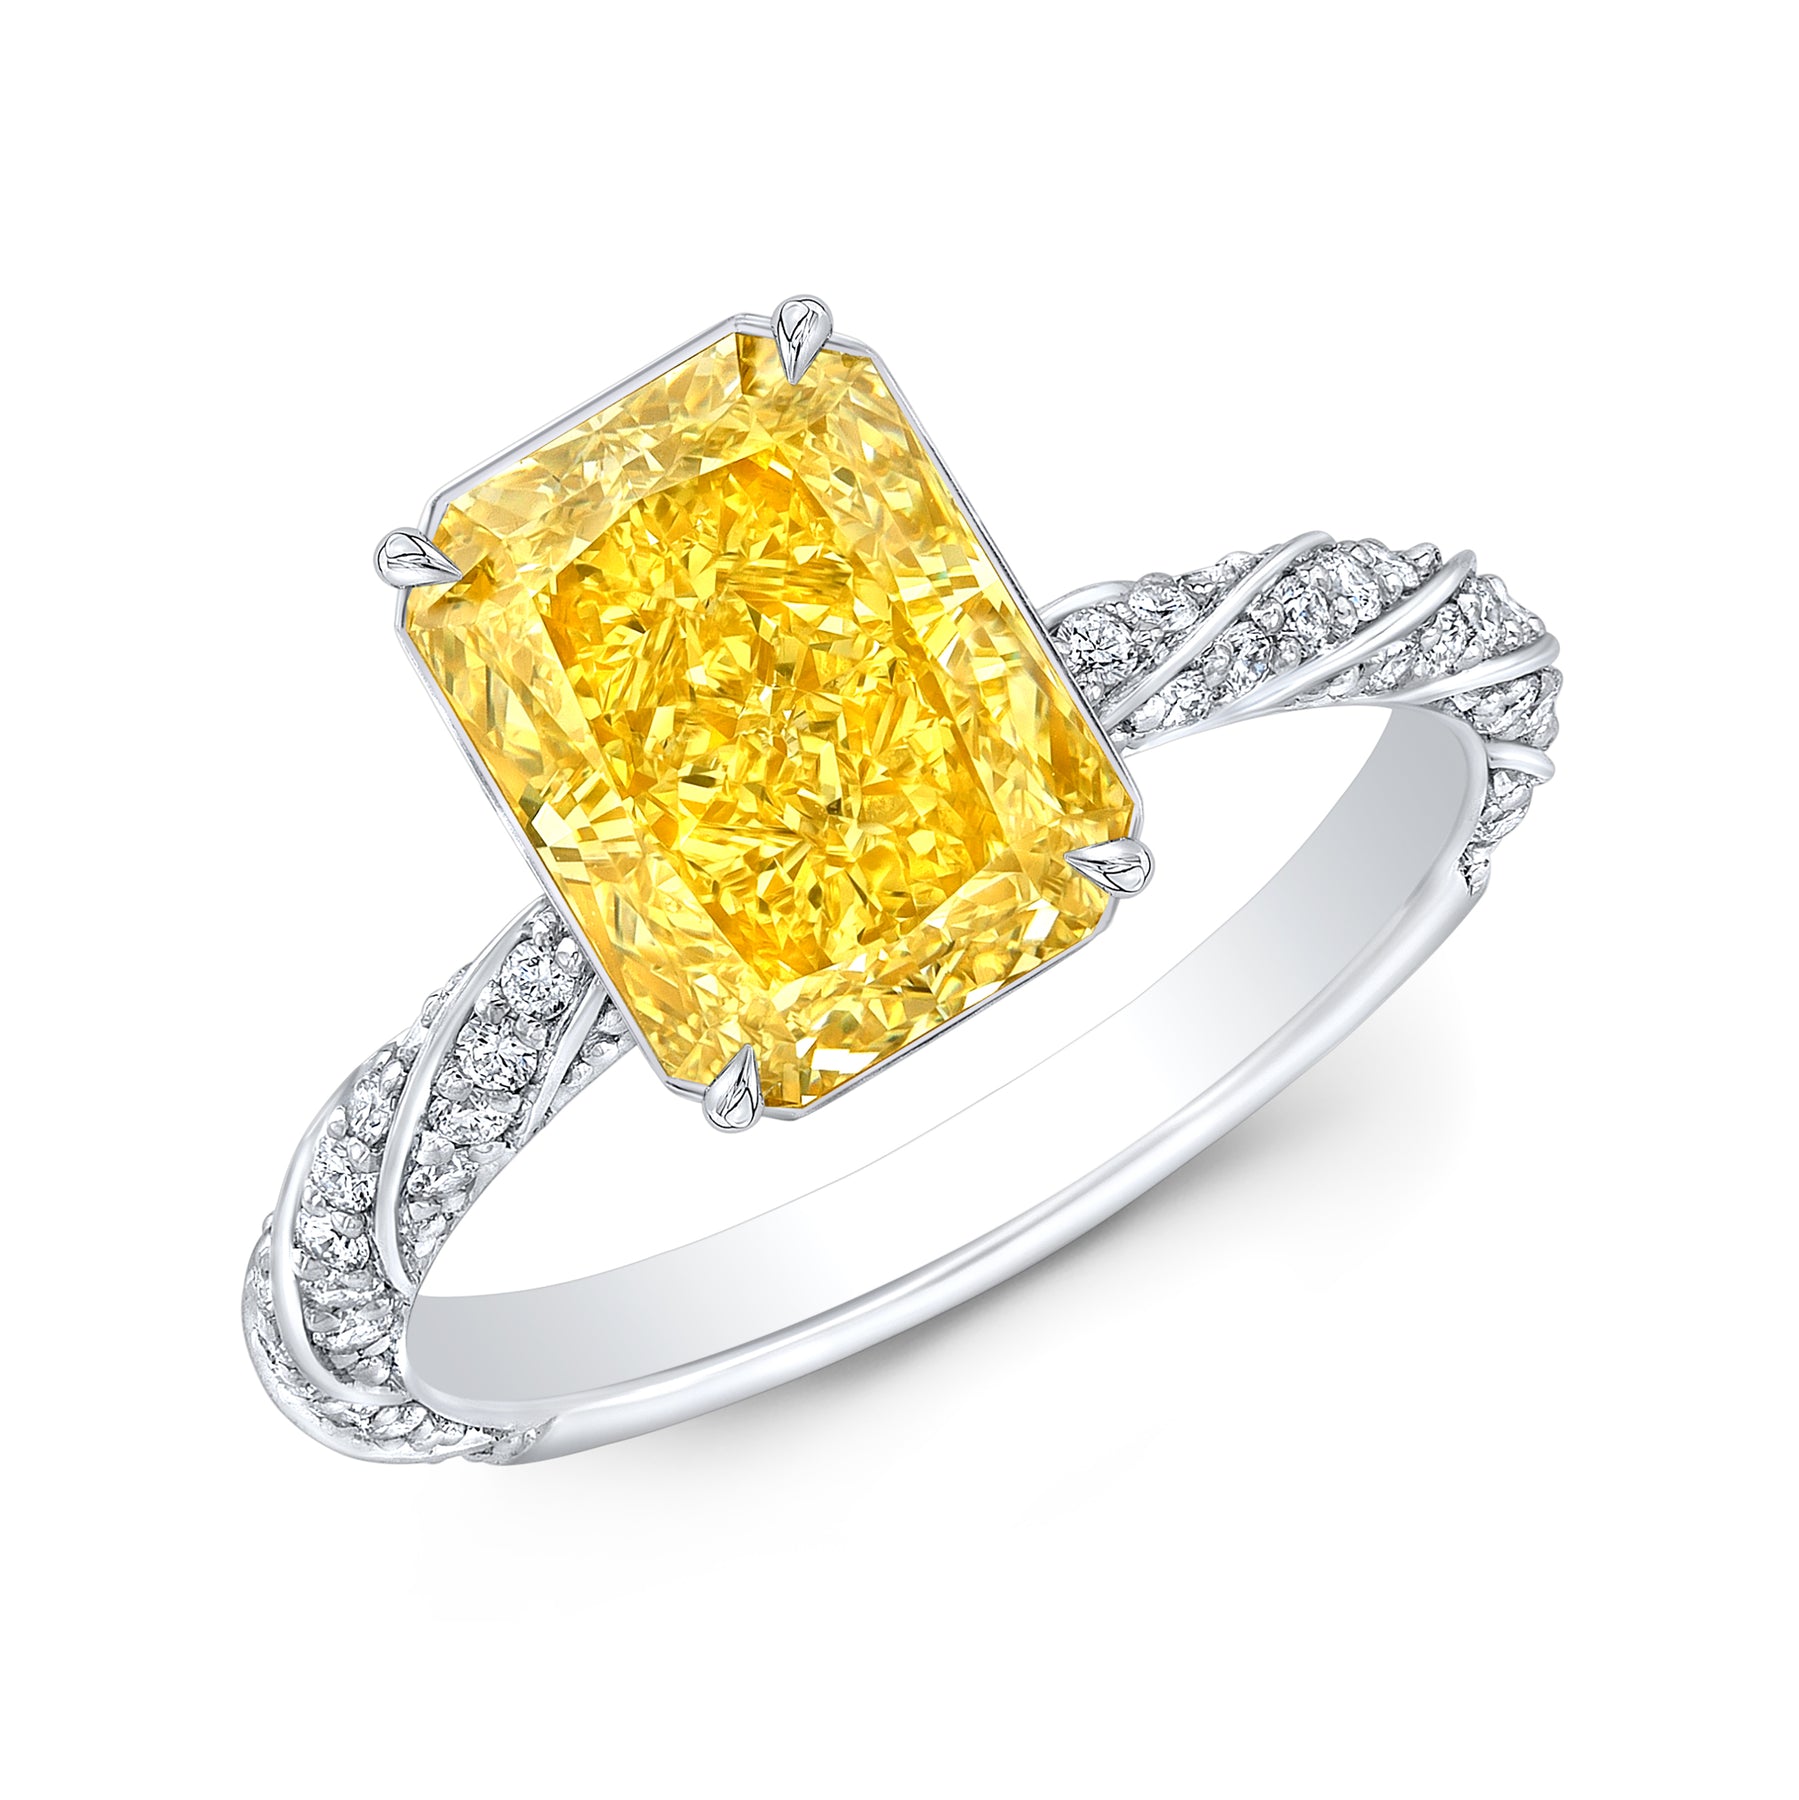 3 Carat Diamond Solitaire Engagement Ring in 14K Yellow Gold (3 g) (, I1-I2 Clarity Enhanced), Size 5.5 by SuperJeweler